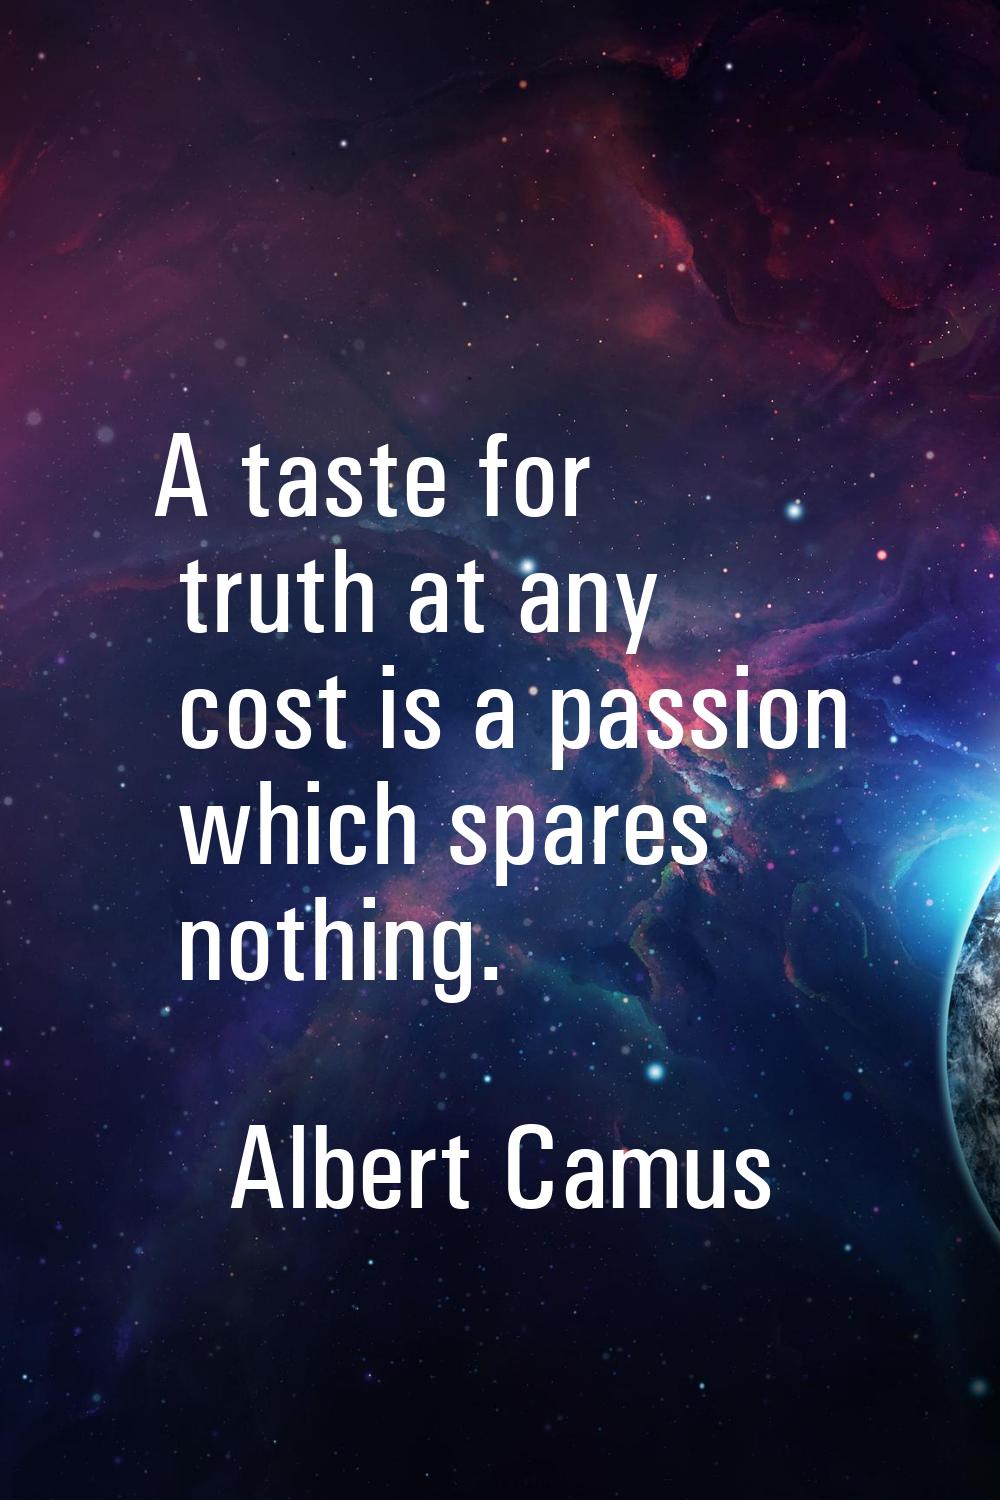 A taste for truth at any cost is a passion which spares nothing.